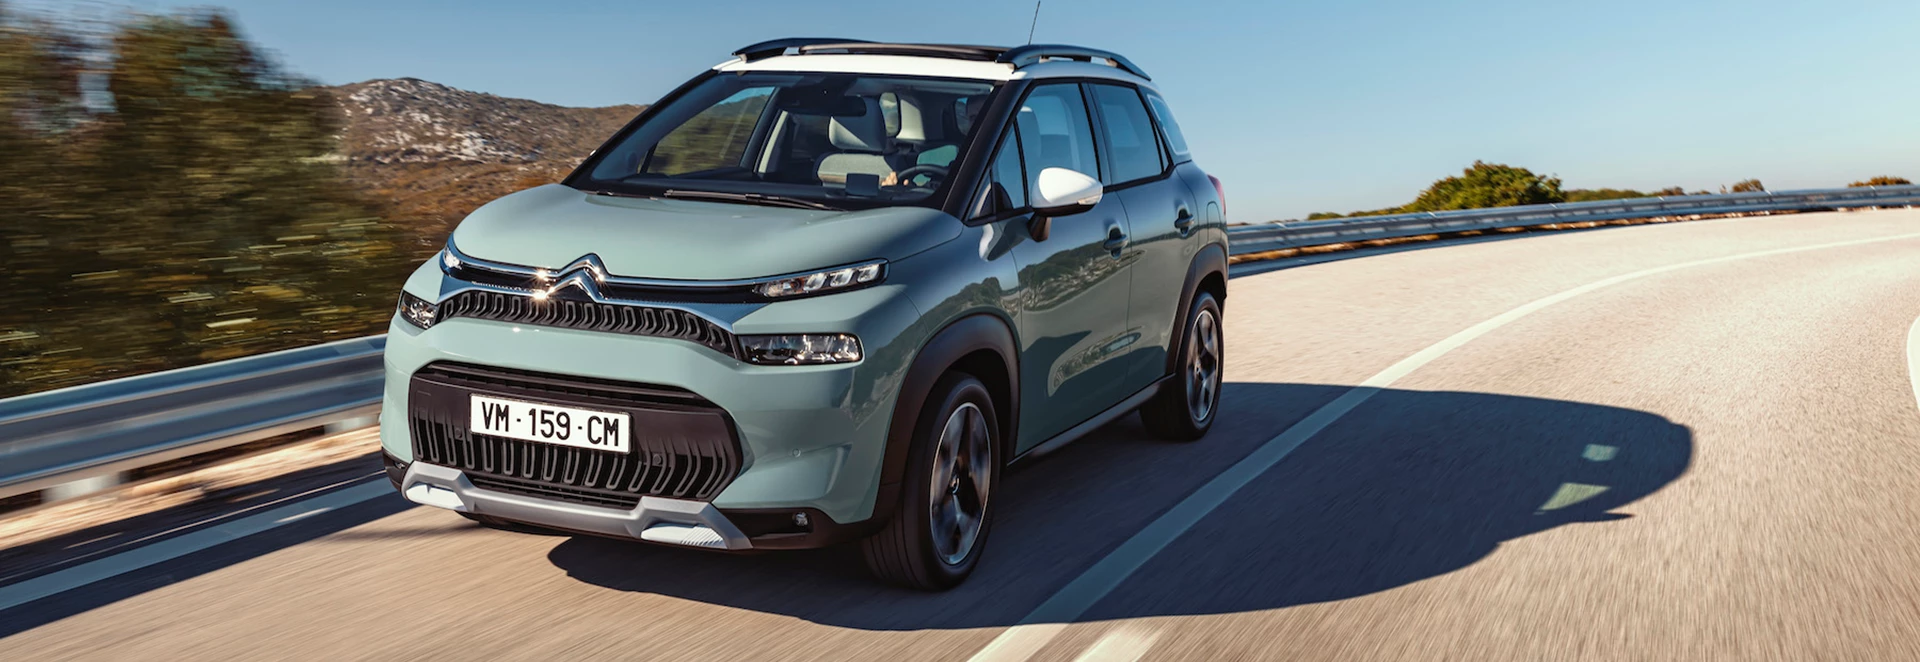 Facelifted Citroen C3 Aircross revealed with striking new front end 